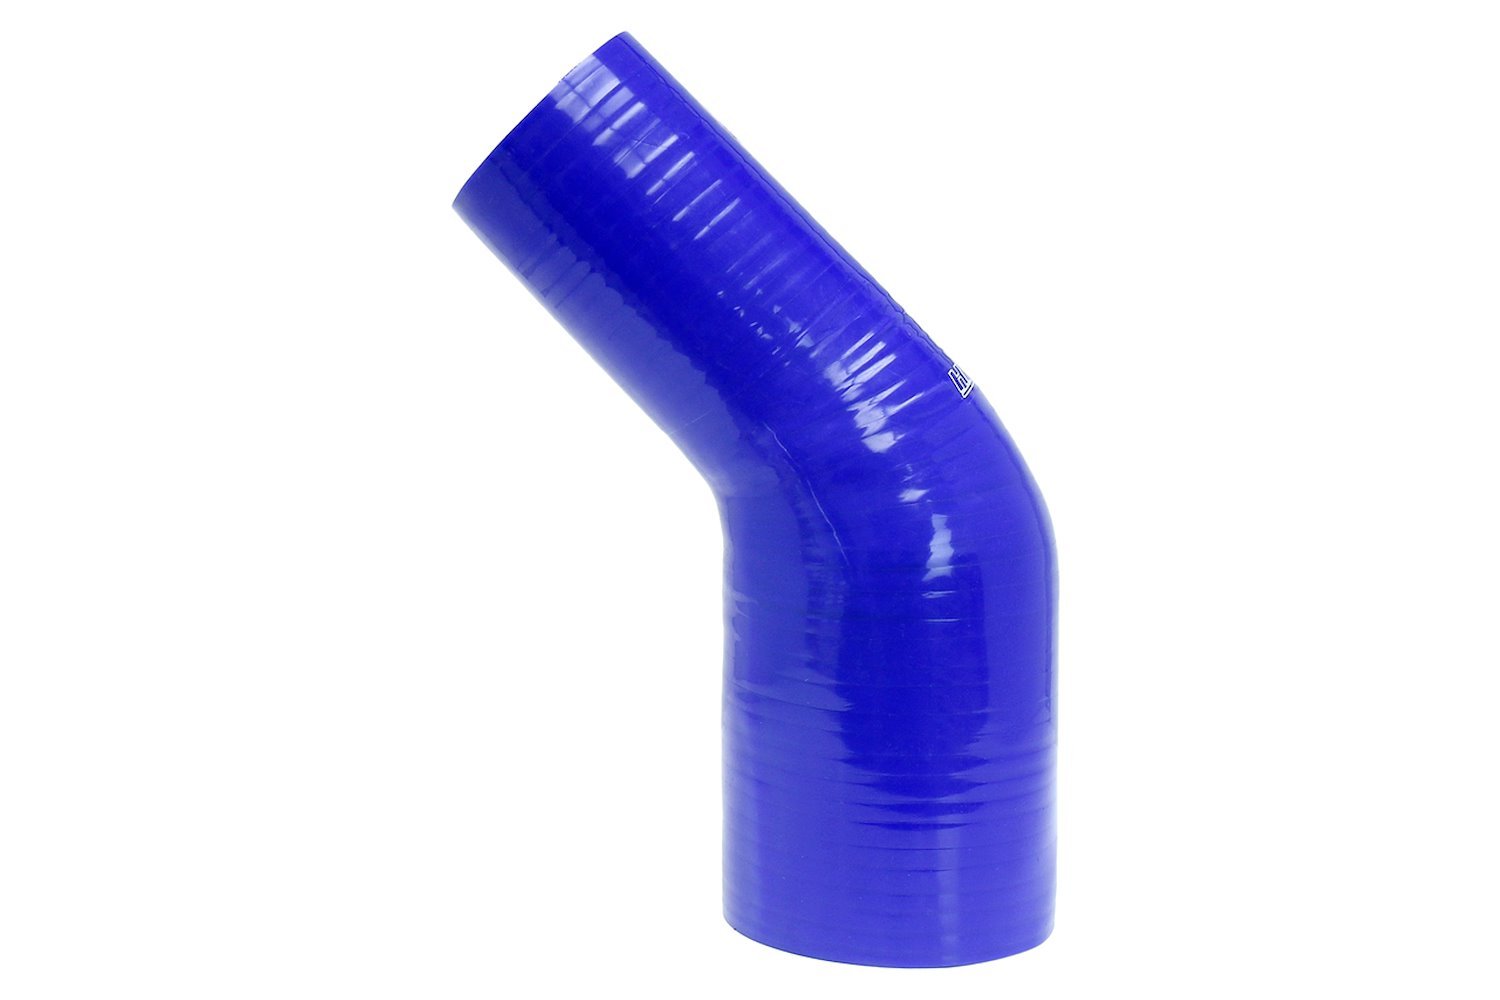 HTSER45-375-400-BLUE Silicone 45-Degree Elbow Hose, High-Temp 4-Ply Reinforced, 3-3/4 in. - 4 in. ID, Blue